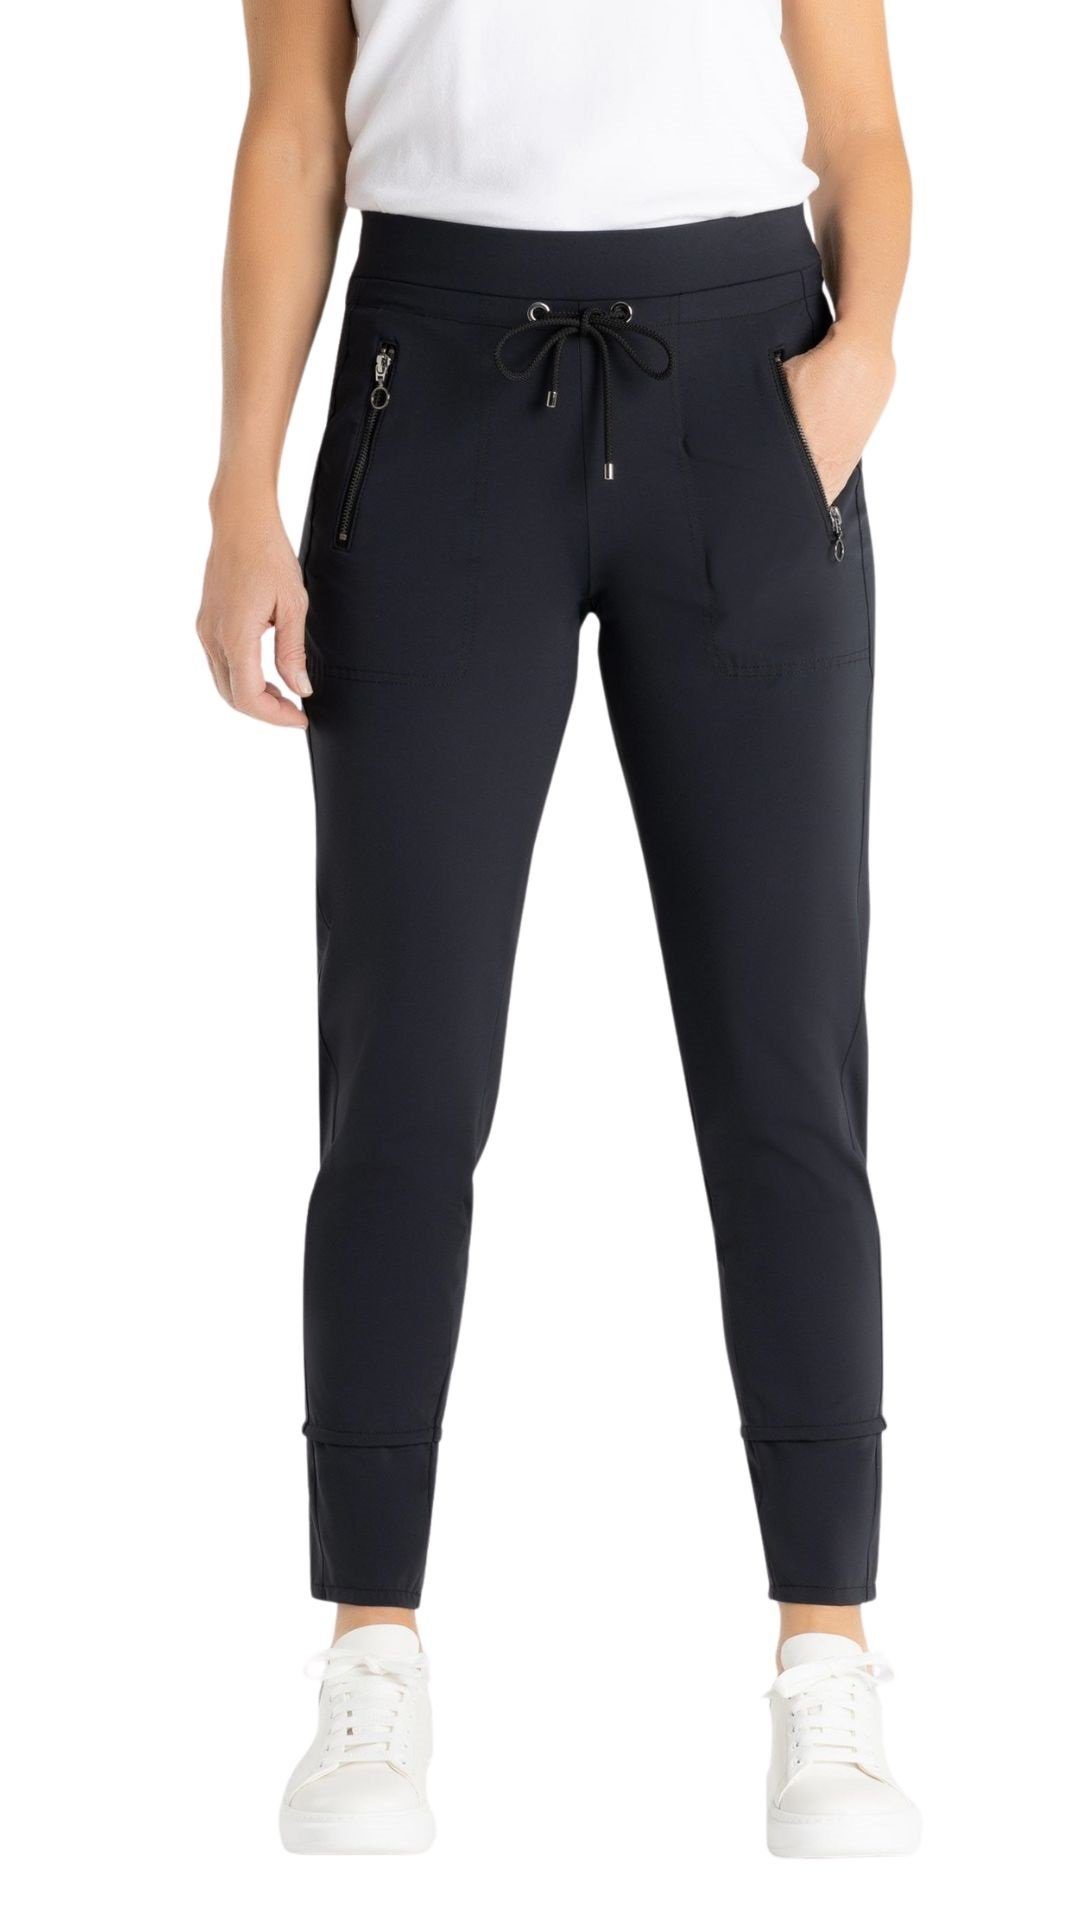 MAC Jogger Pants Tunnelzug Active Stretch aus leichtem Fit Techno Easy Relaxed black mit